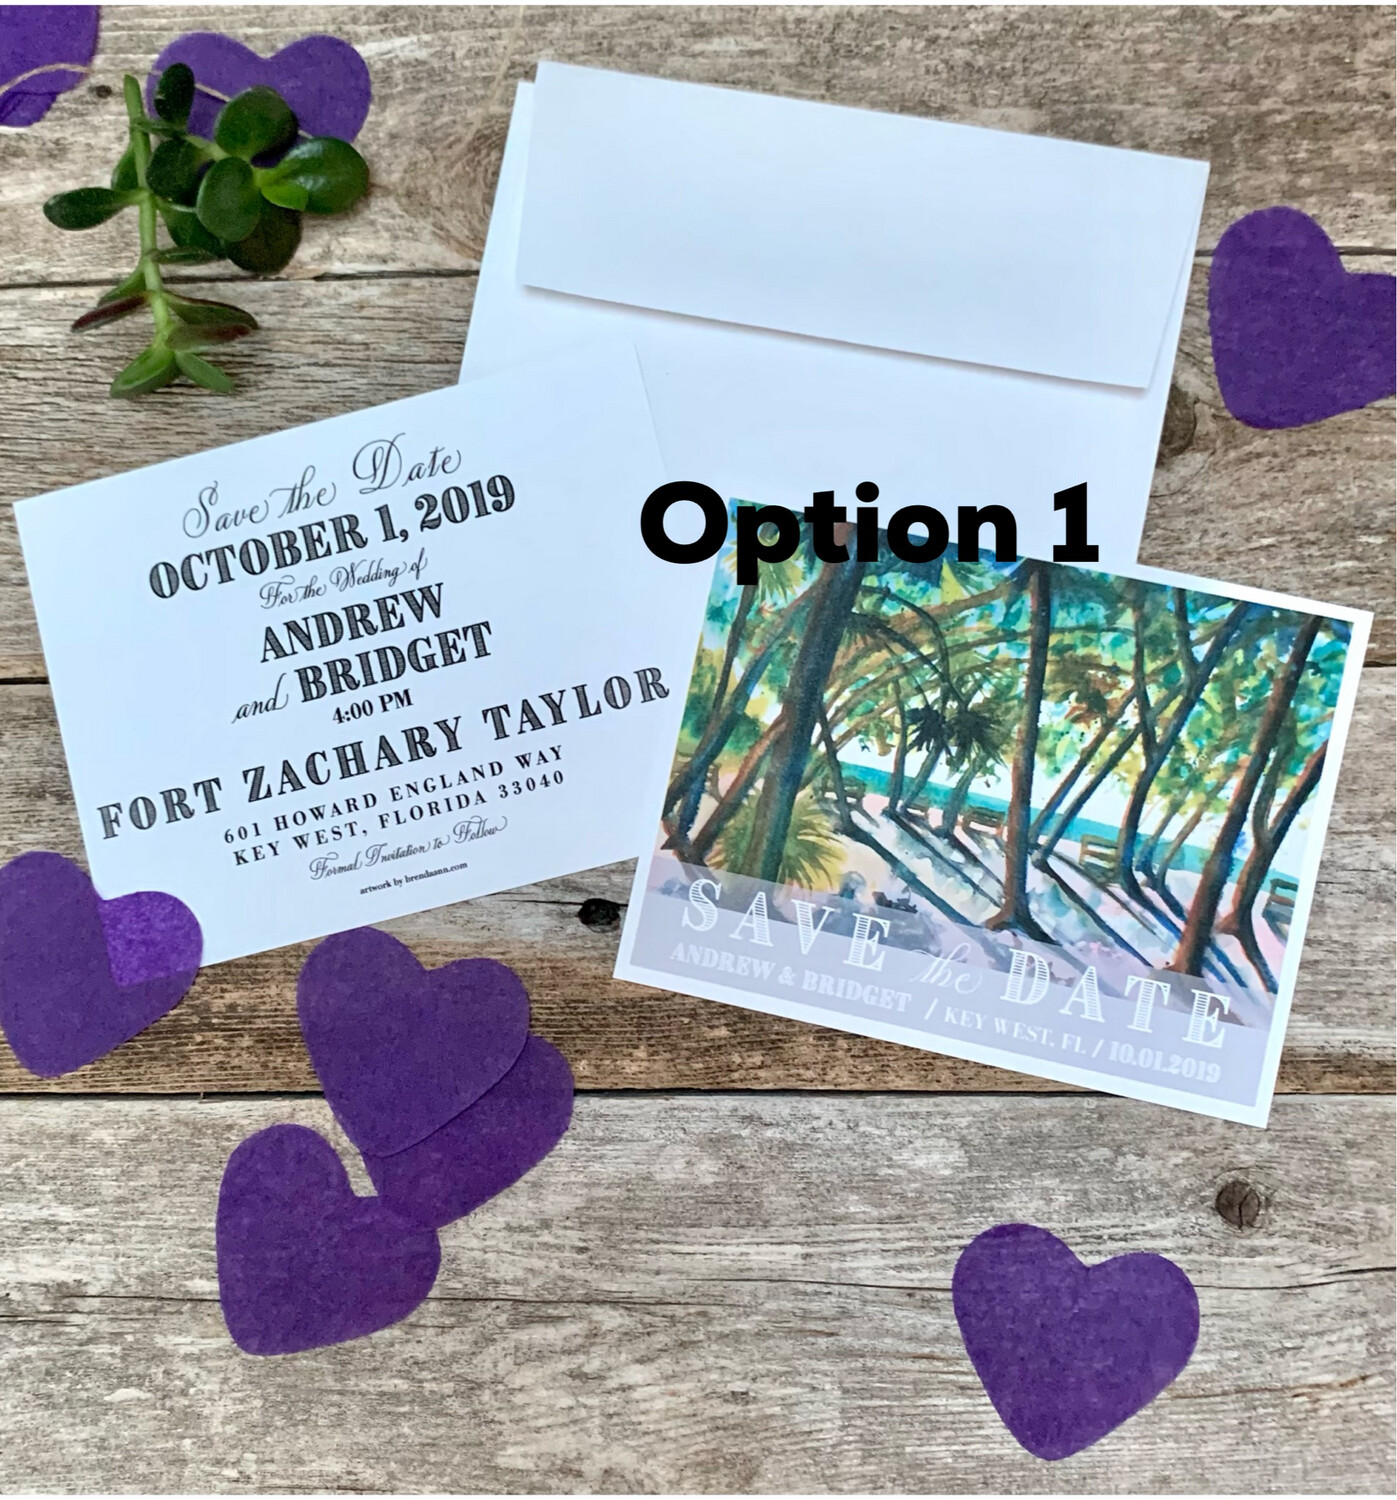 Fort Zachary Taylor Key West Watercolor Wedding Save the Date Cards